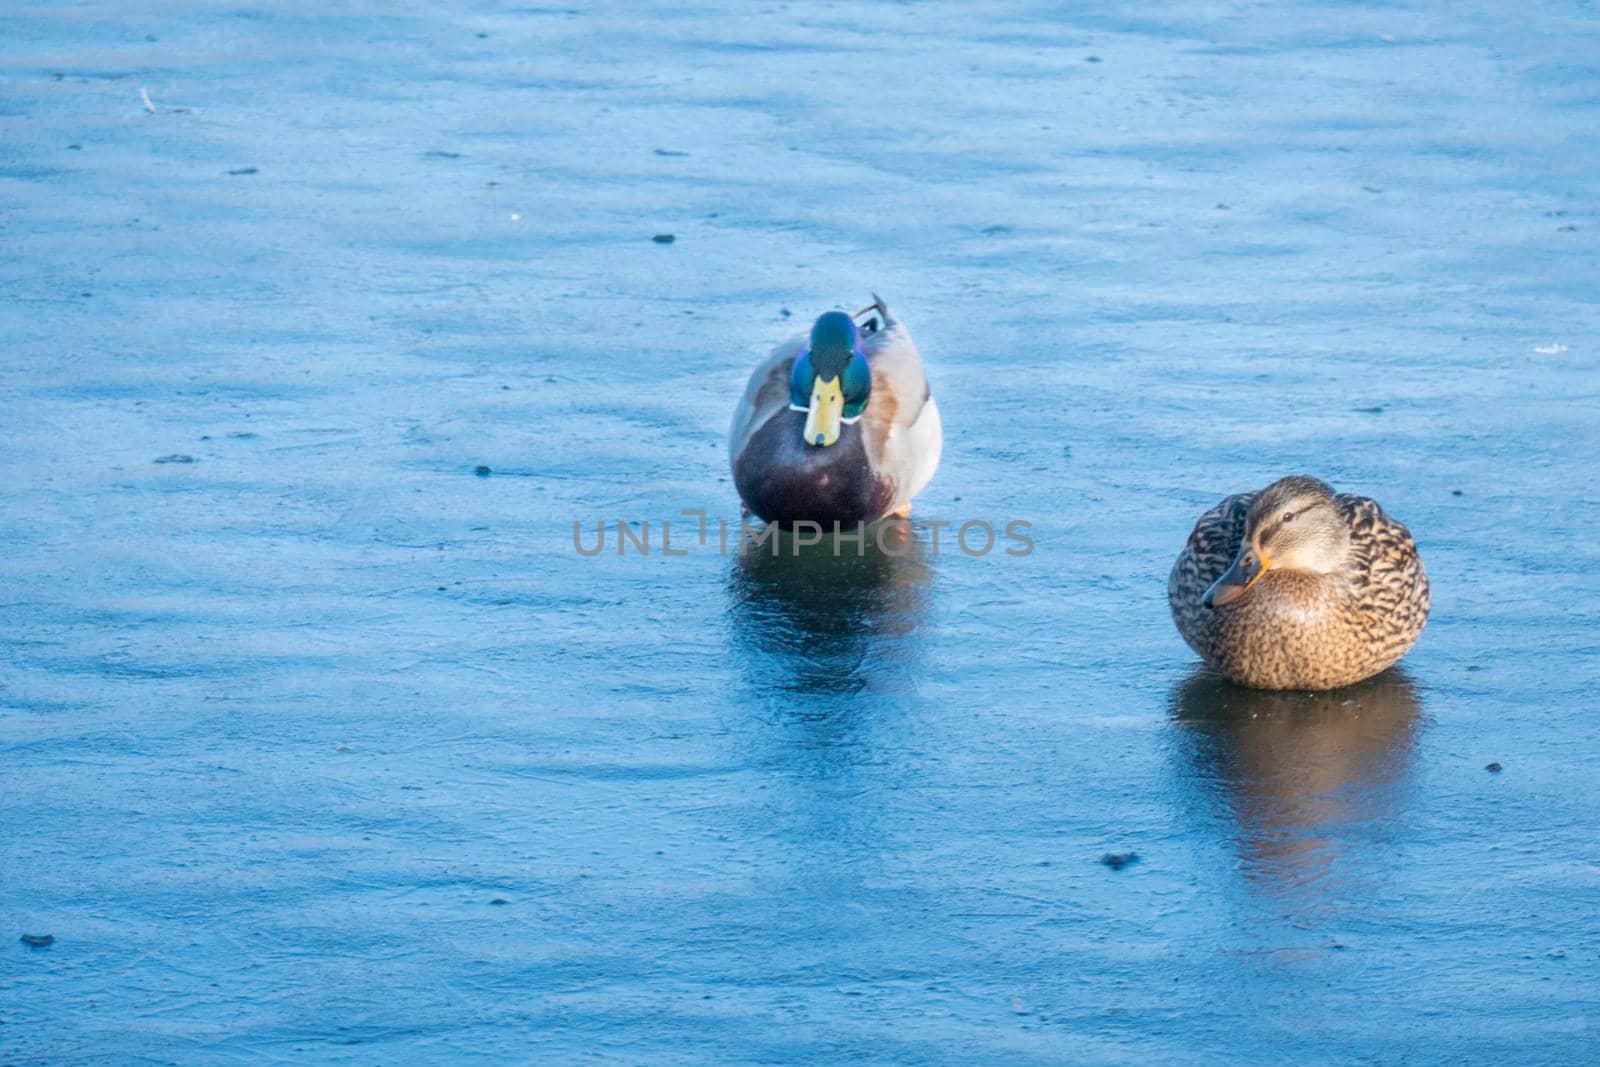 A couple of duck pair on ice for the winter. Two ducks . Close up mallard couple, Anas platyrhynchos, male and female duck bird swimming on lake water suface in sunlight. love concept. Copy space.